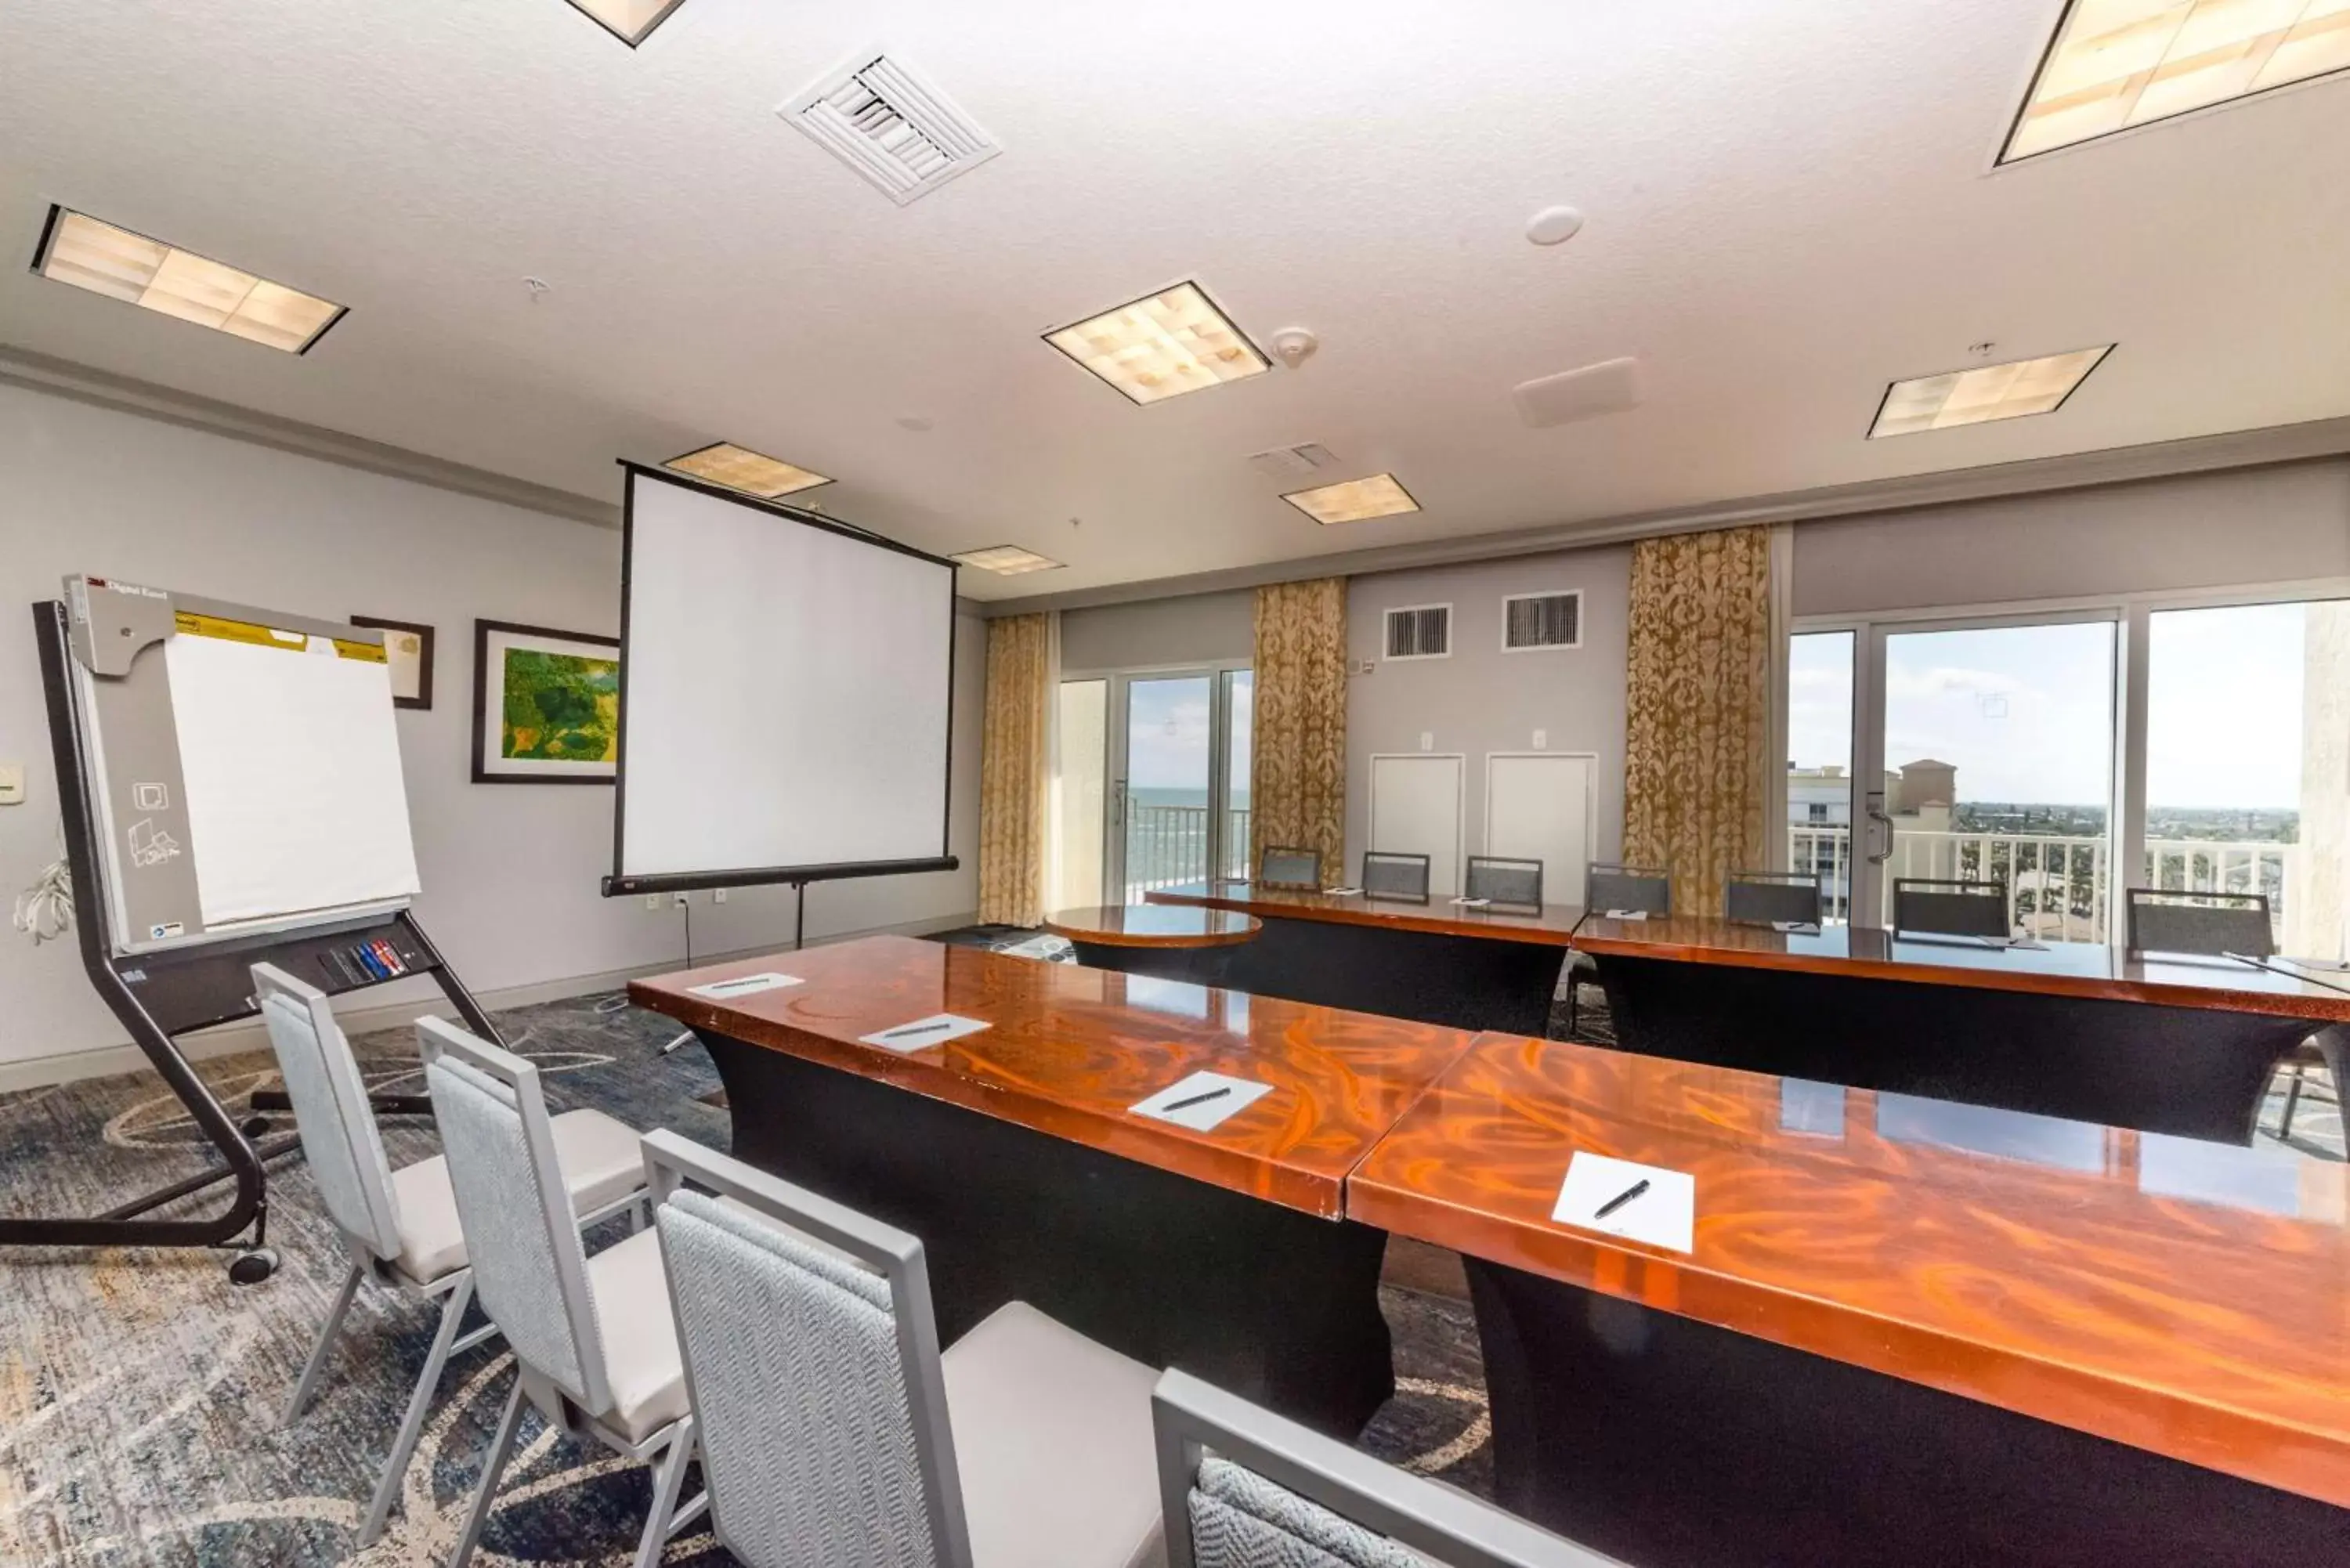 Meeting/conference room in Hilton Melbourne Beach Oceanfront